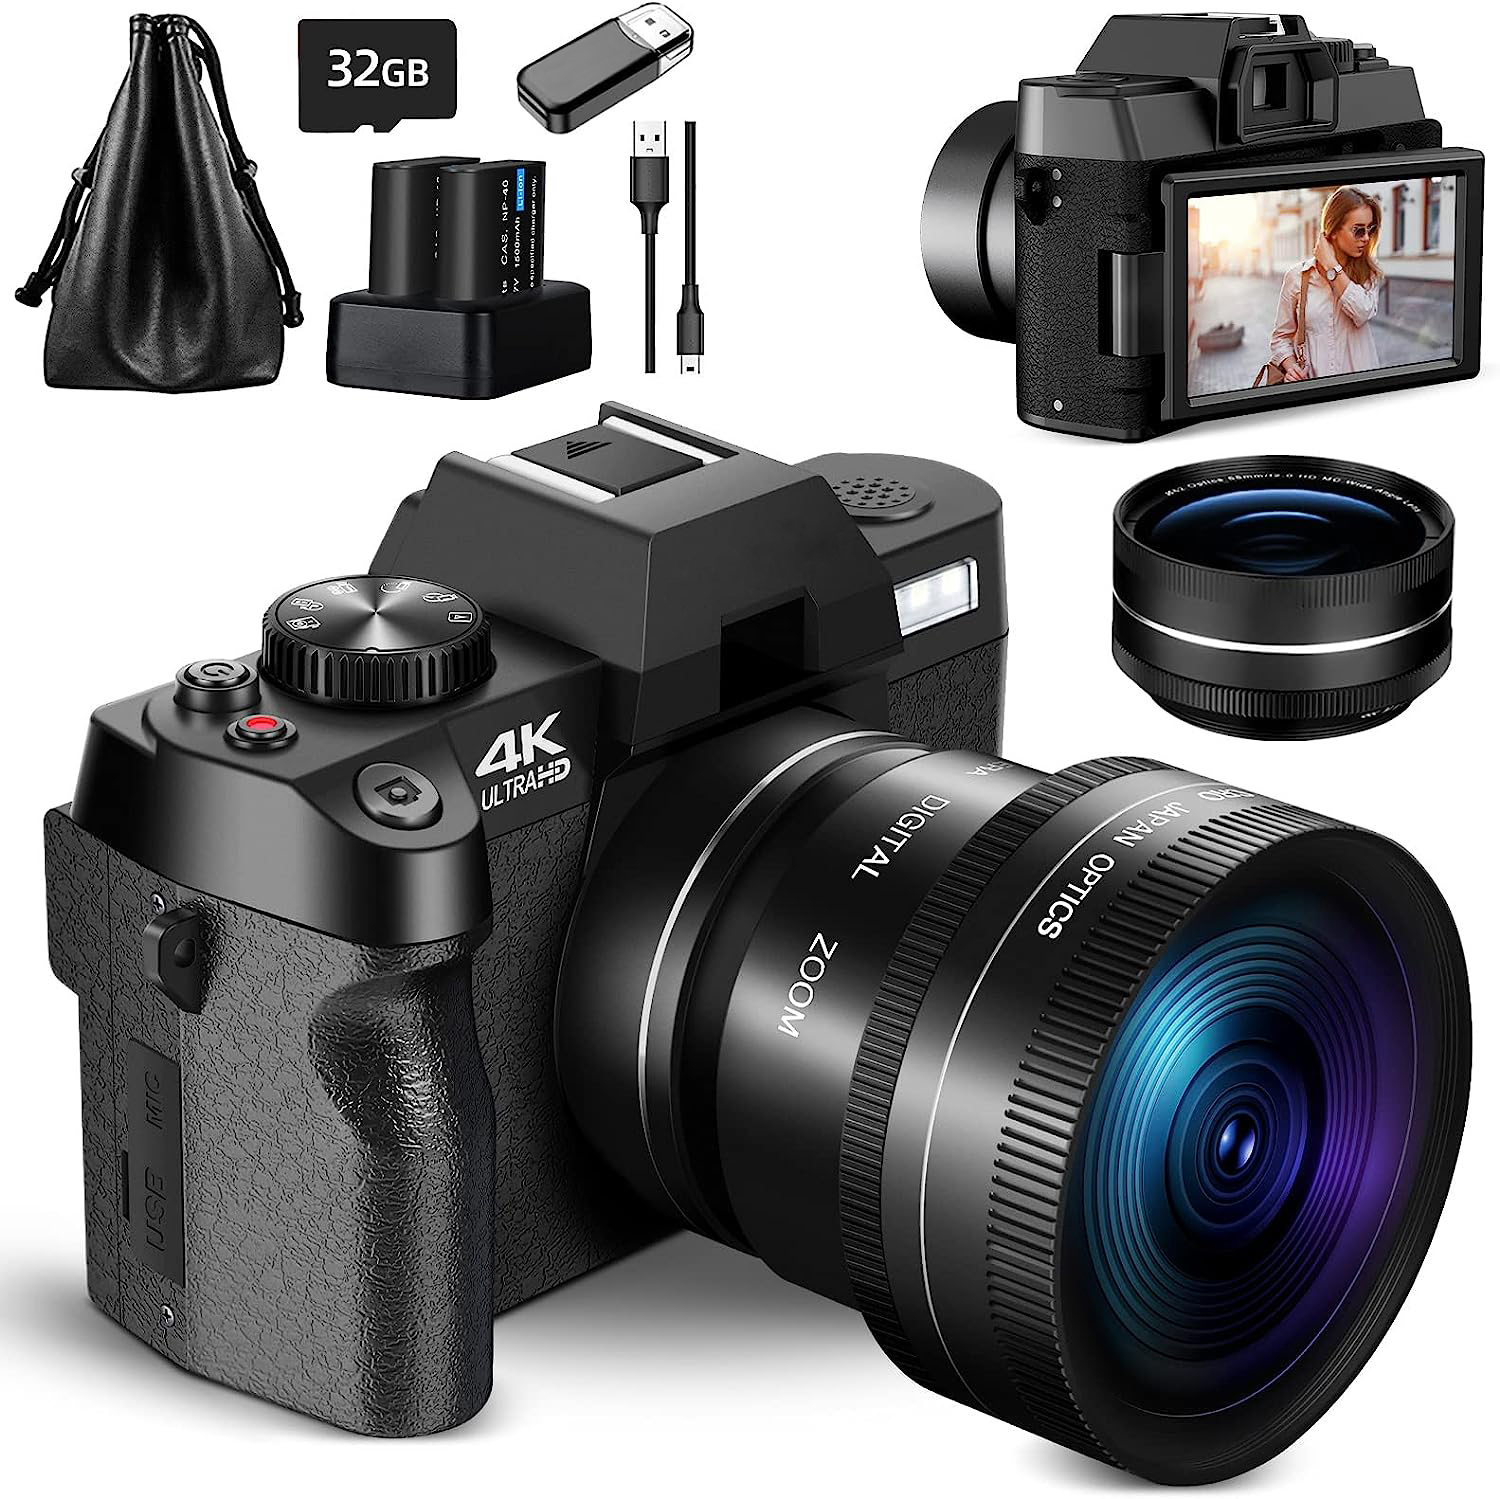 NBD Digital Camera 4K Ultra HD 48MP All-in-One Vlogging Camera with Wide Angle Lens, Digital Zoom 16x and 3" Screen - image 1 of 6